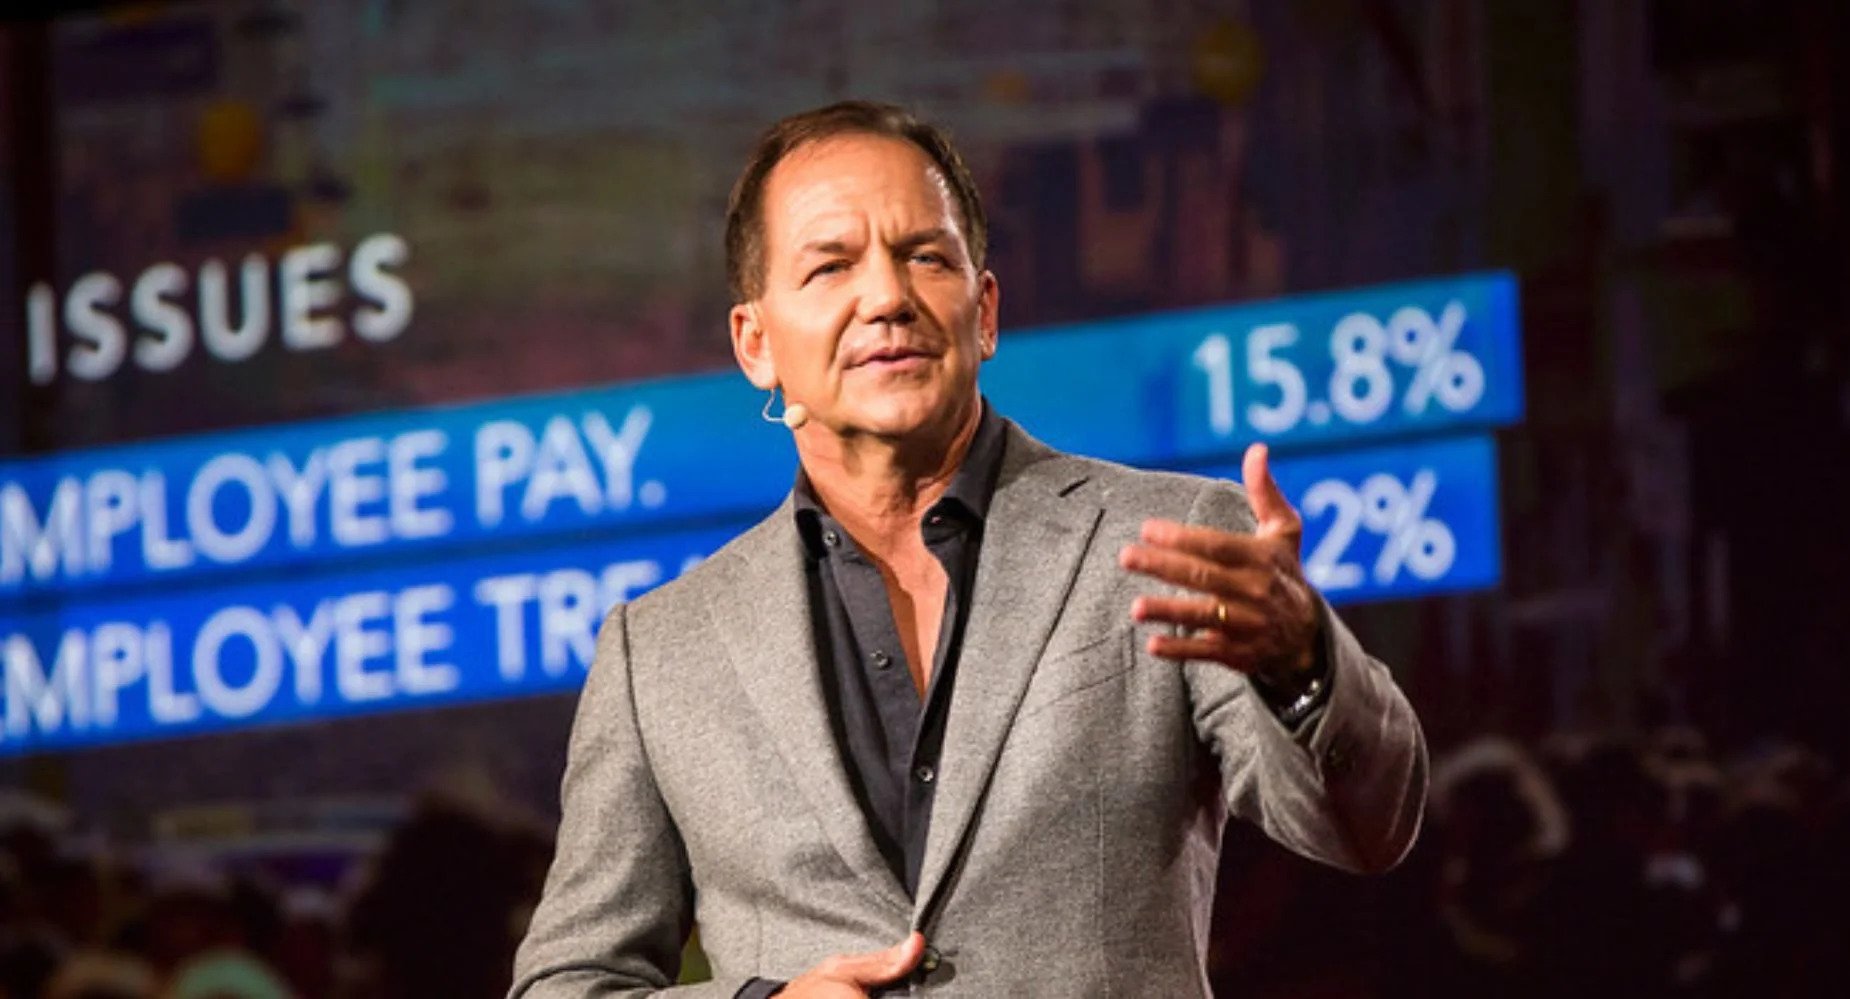 Crypto prices could rise during the inflation, says Paul Tudor Jones